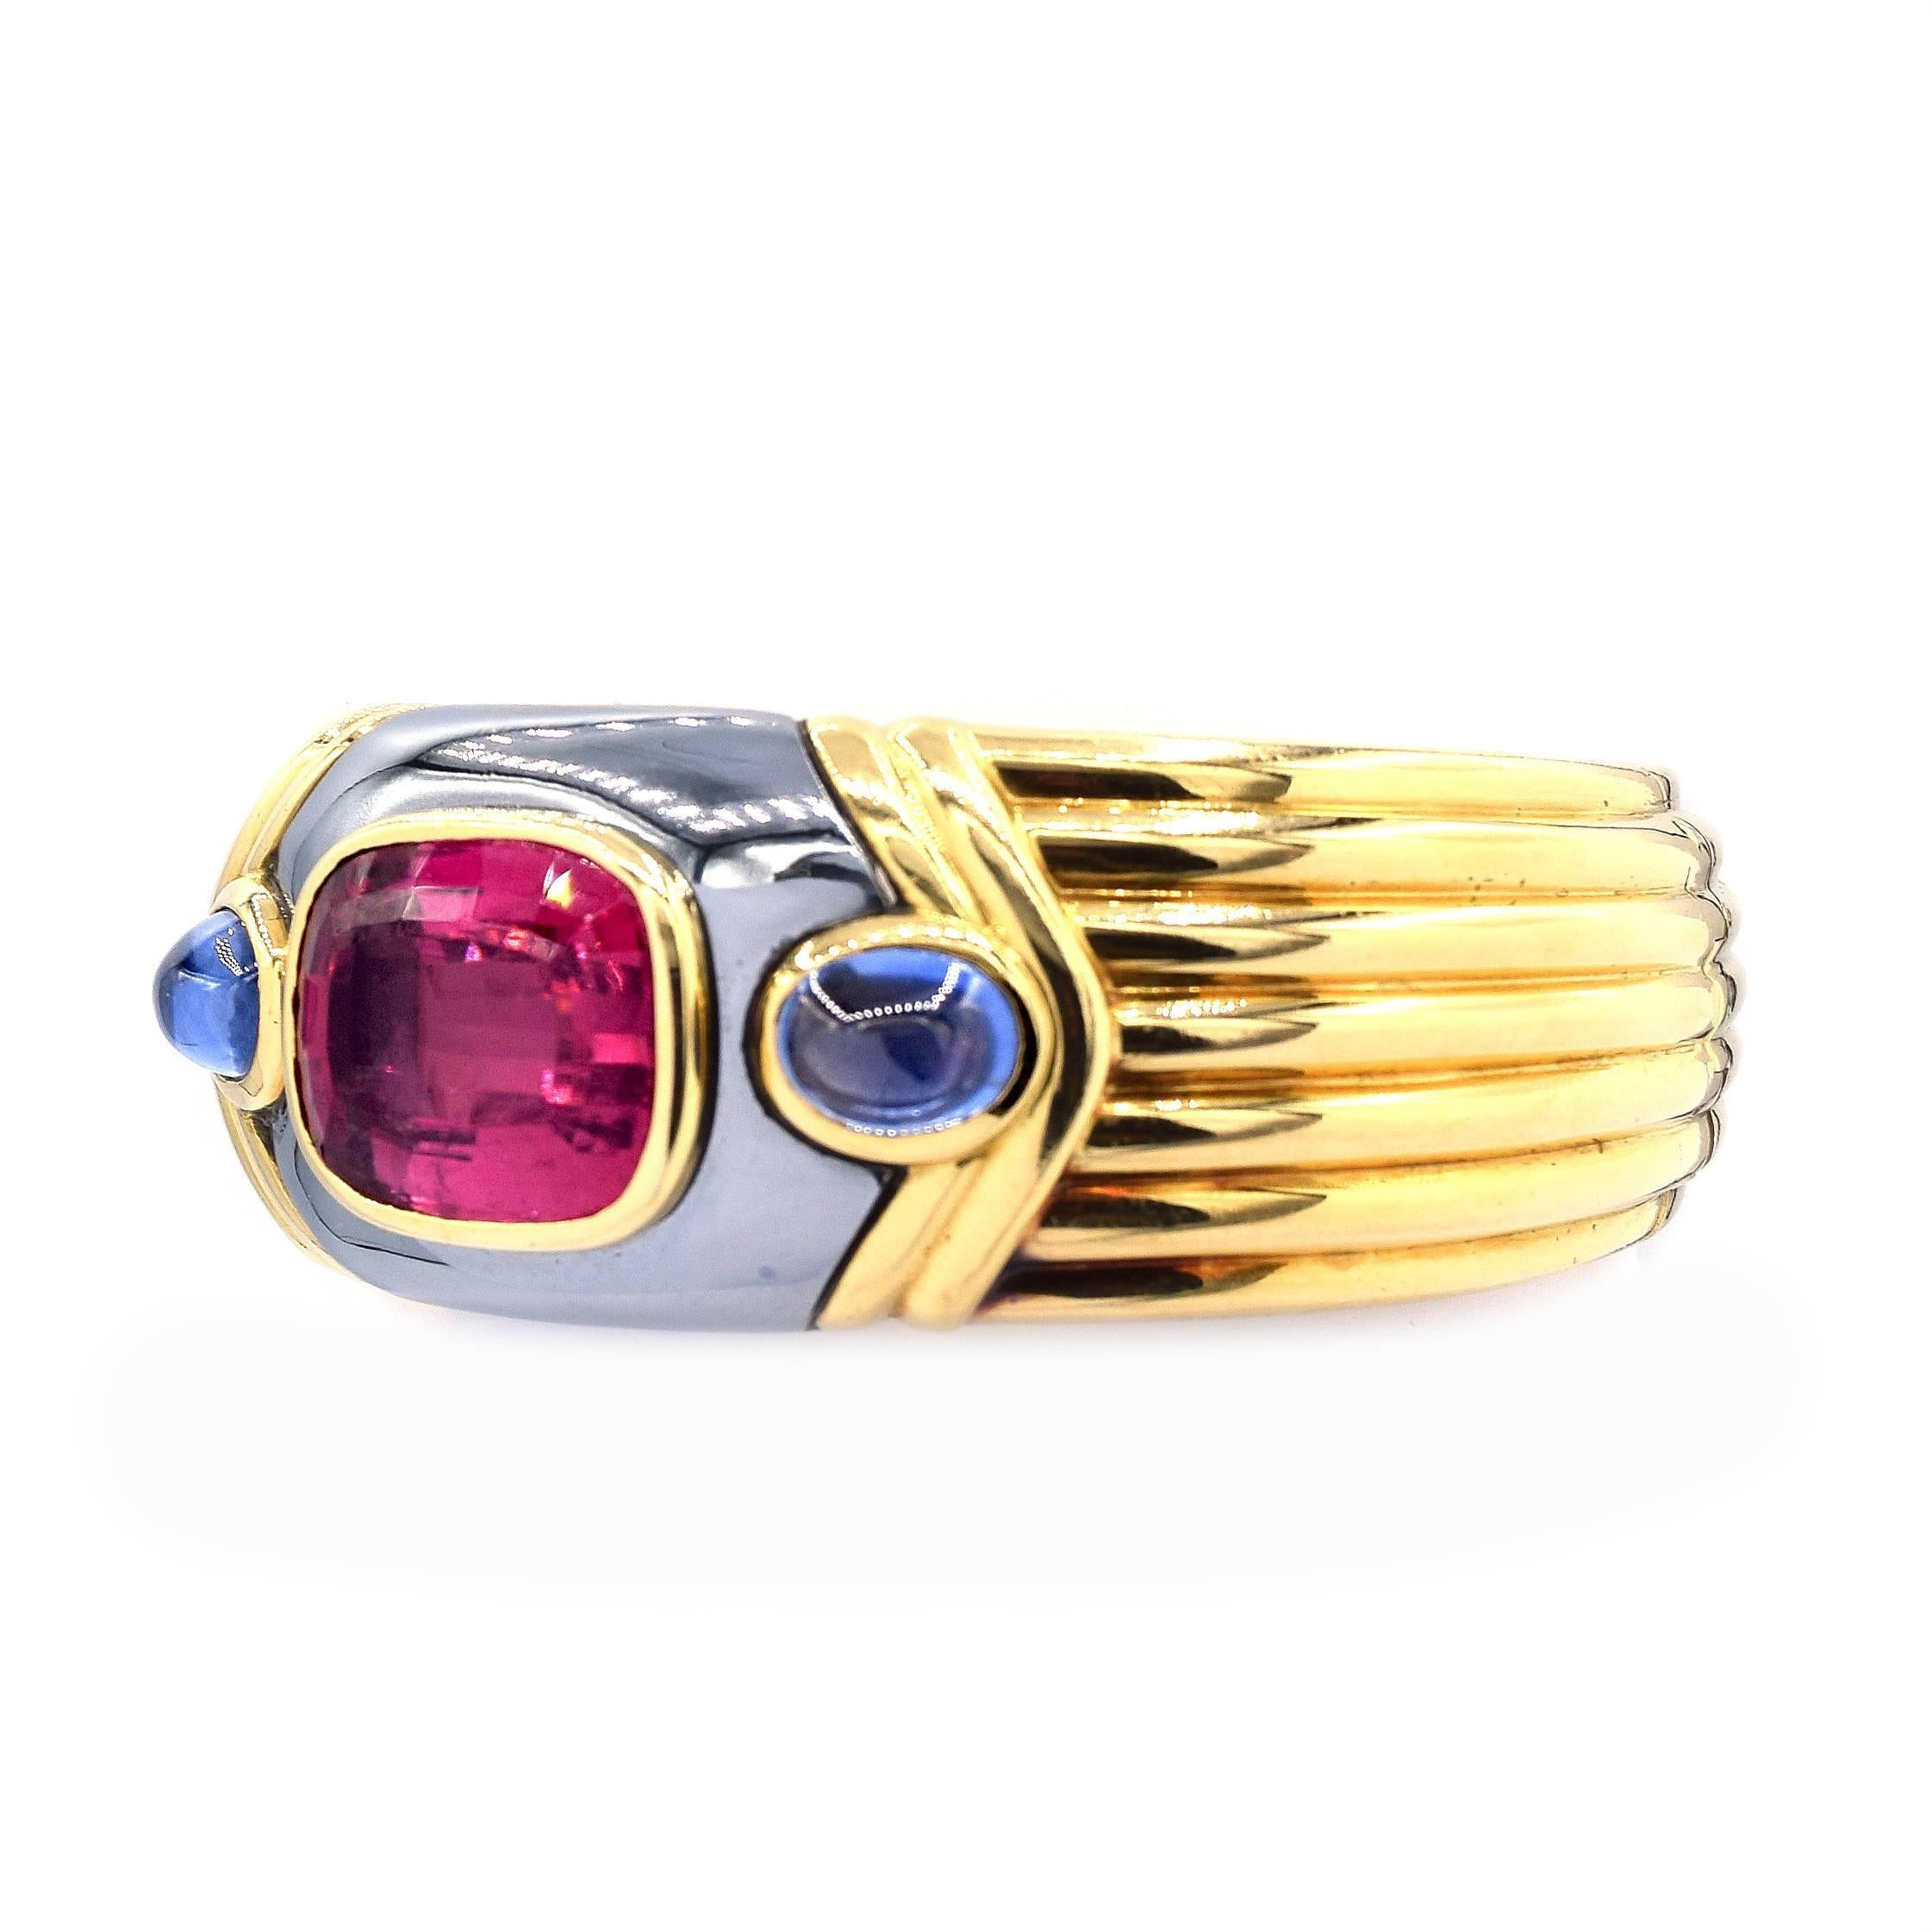 An Italian 18 karat yellow gold bangle bracelet with sapphire and rubelite by Bvlgari numbered BD 7499. The open back flexible bracelet has 2 cabochon sapphires and 1 rubelite. All three stones are bezel set in the bangle. 
Signed 